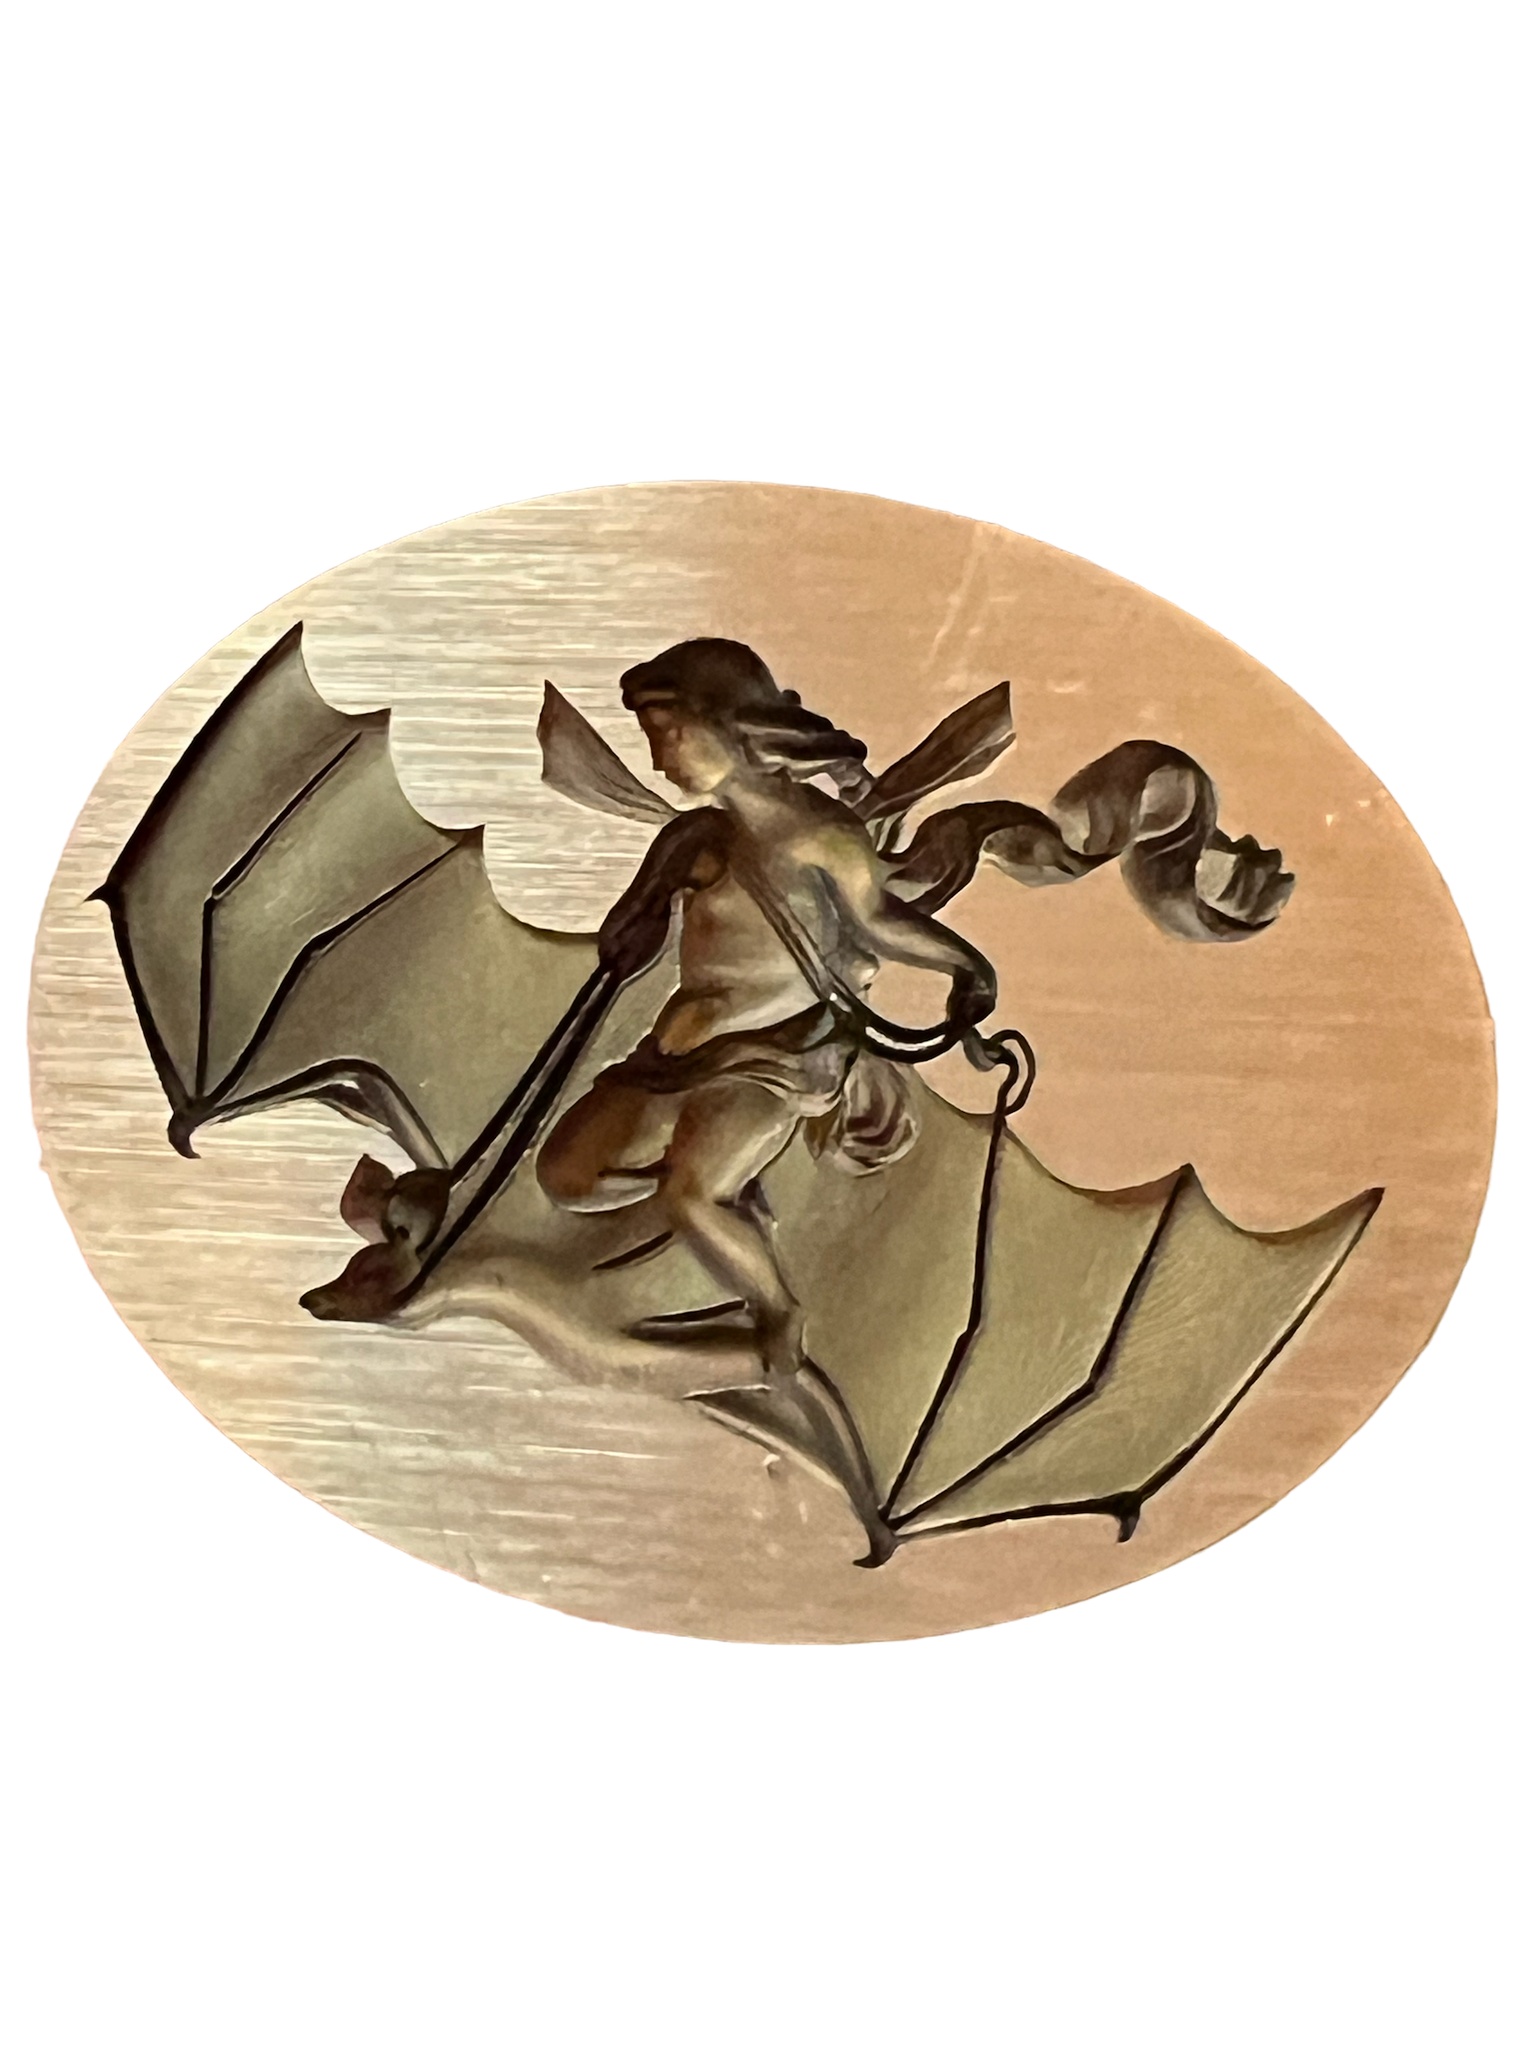 Ariel on a Bat (from Shakespeare’s The Tempest)